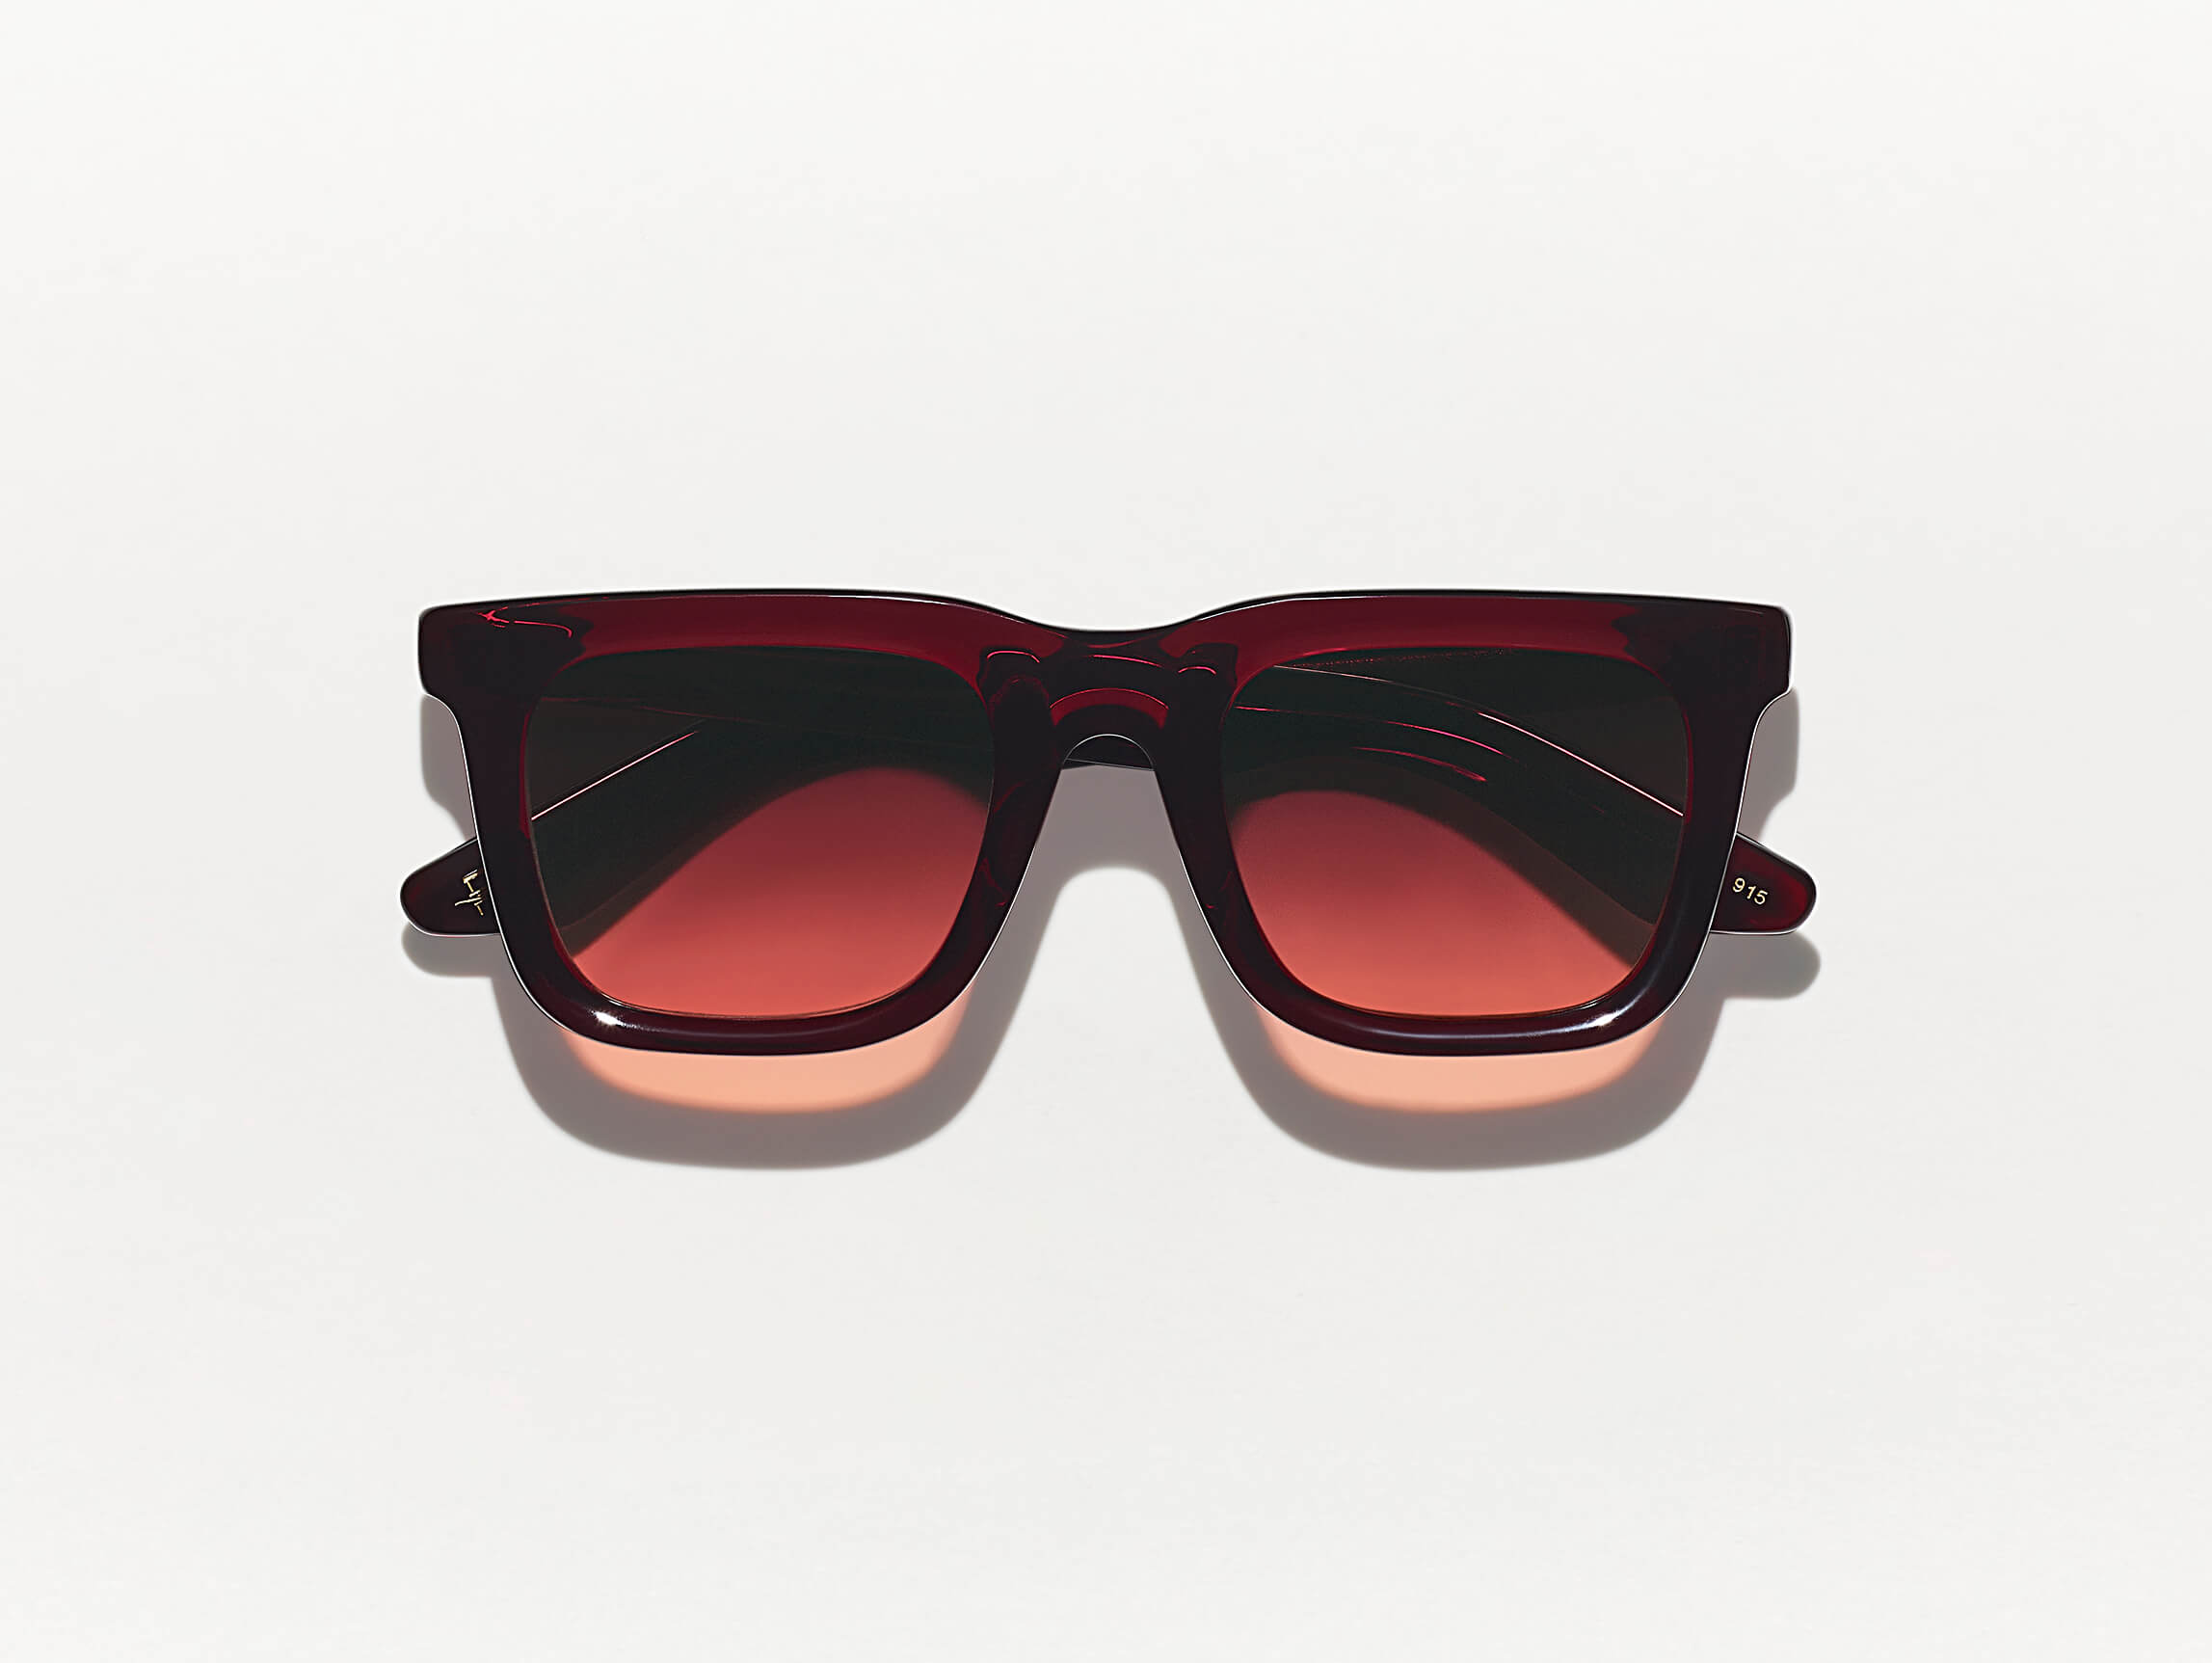 The RIZIK SUN in Burgundy with Cabernet Tinted Lenses